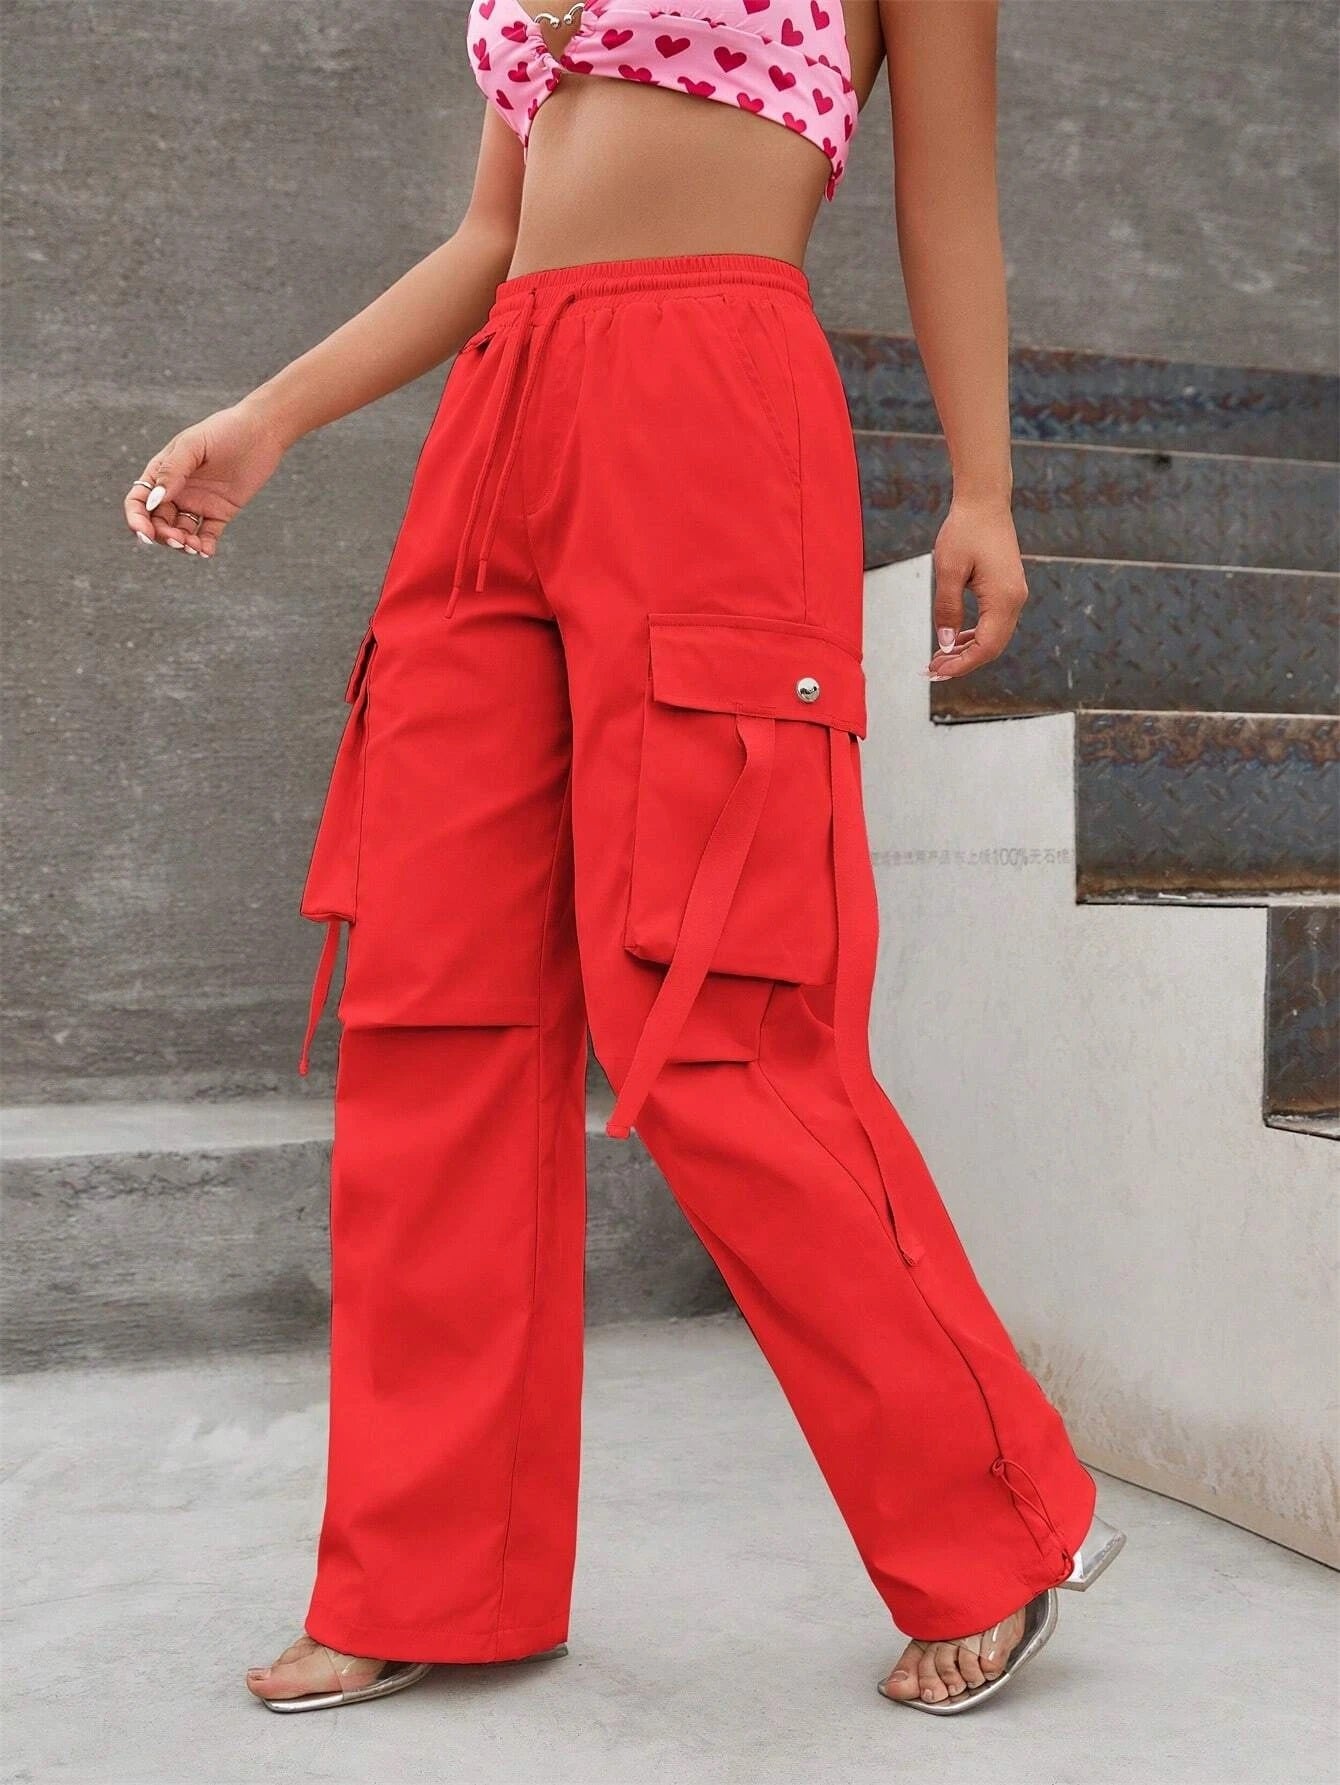 CM-BS432842 Women Casual Seoul Style Flap Pocket Side Drawstring Waist Cargo Pants - Red